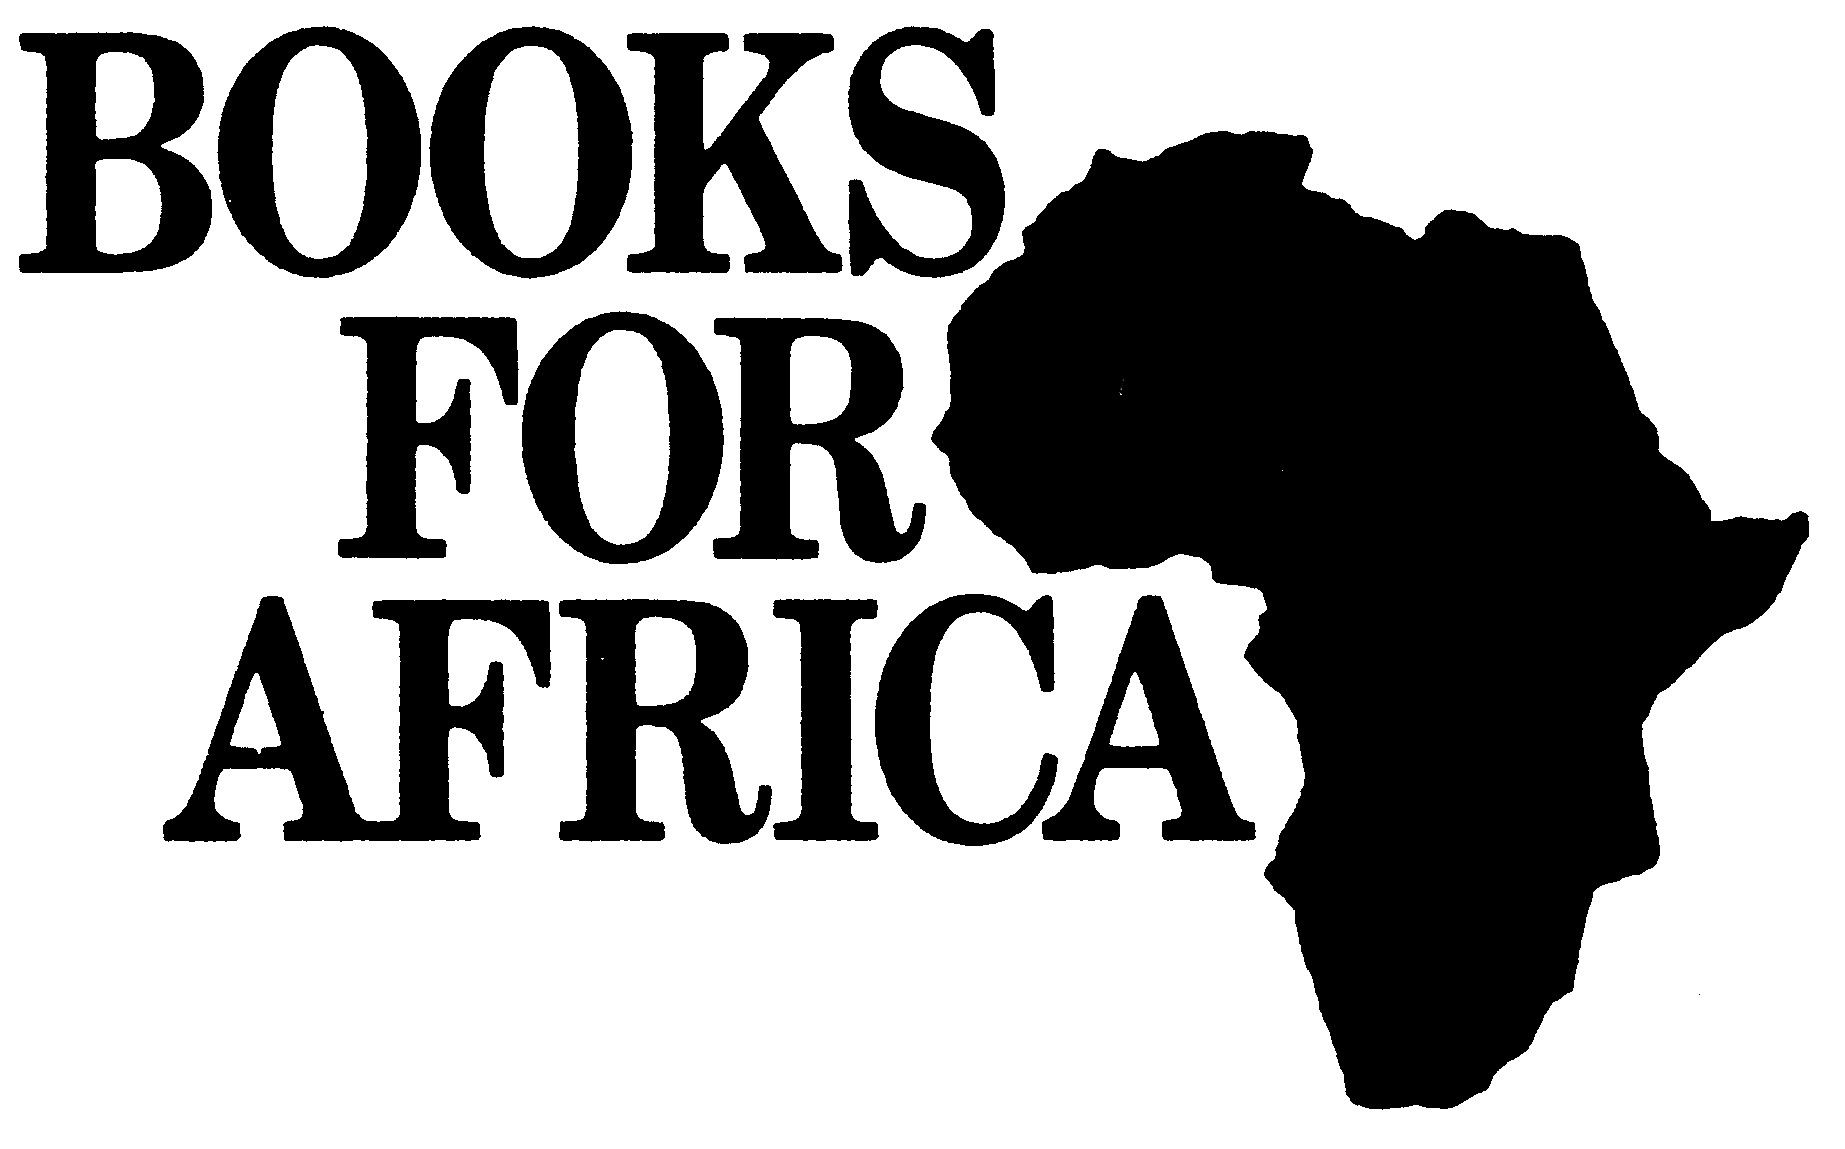 About Books for Africa